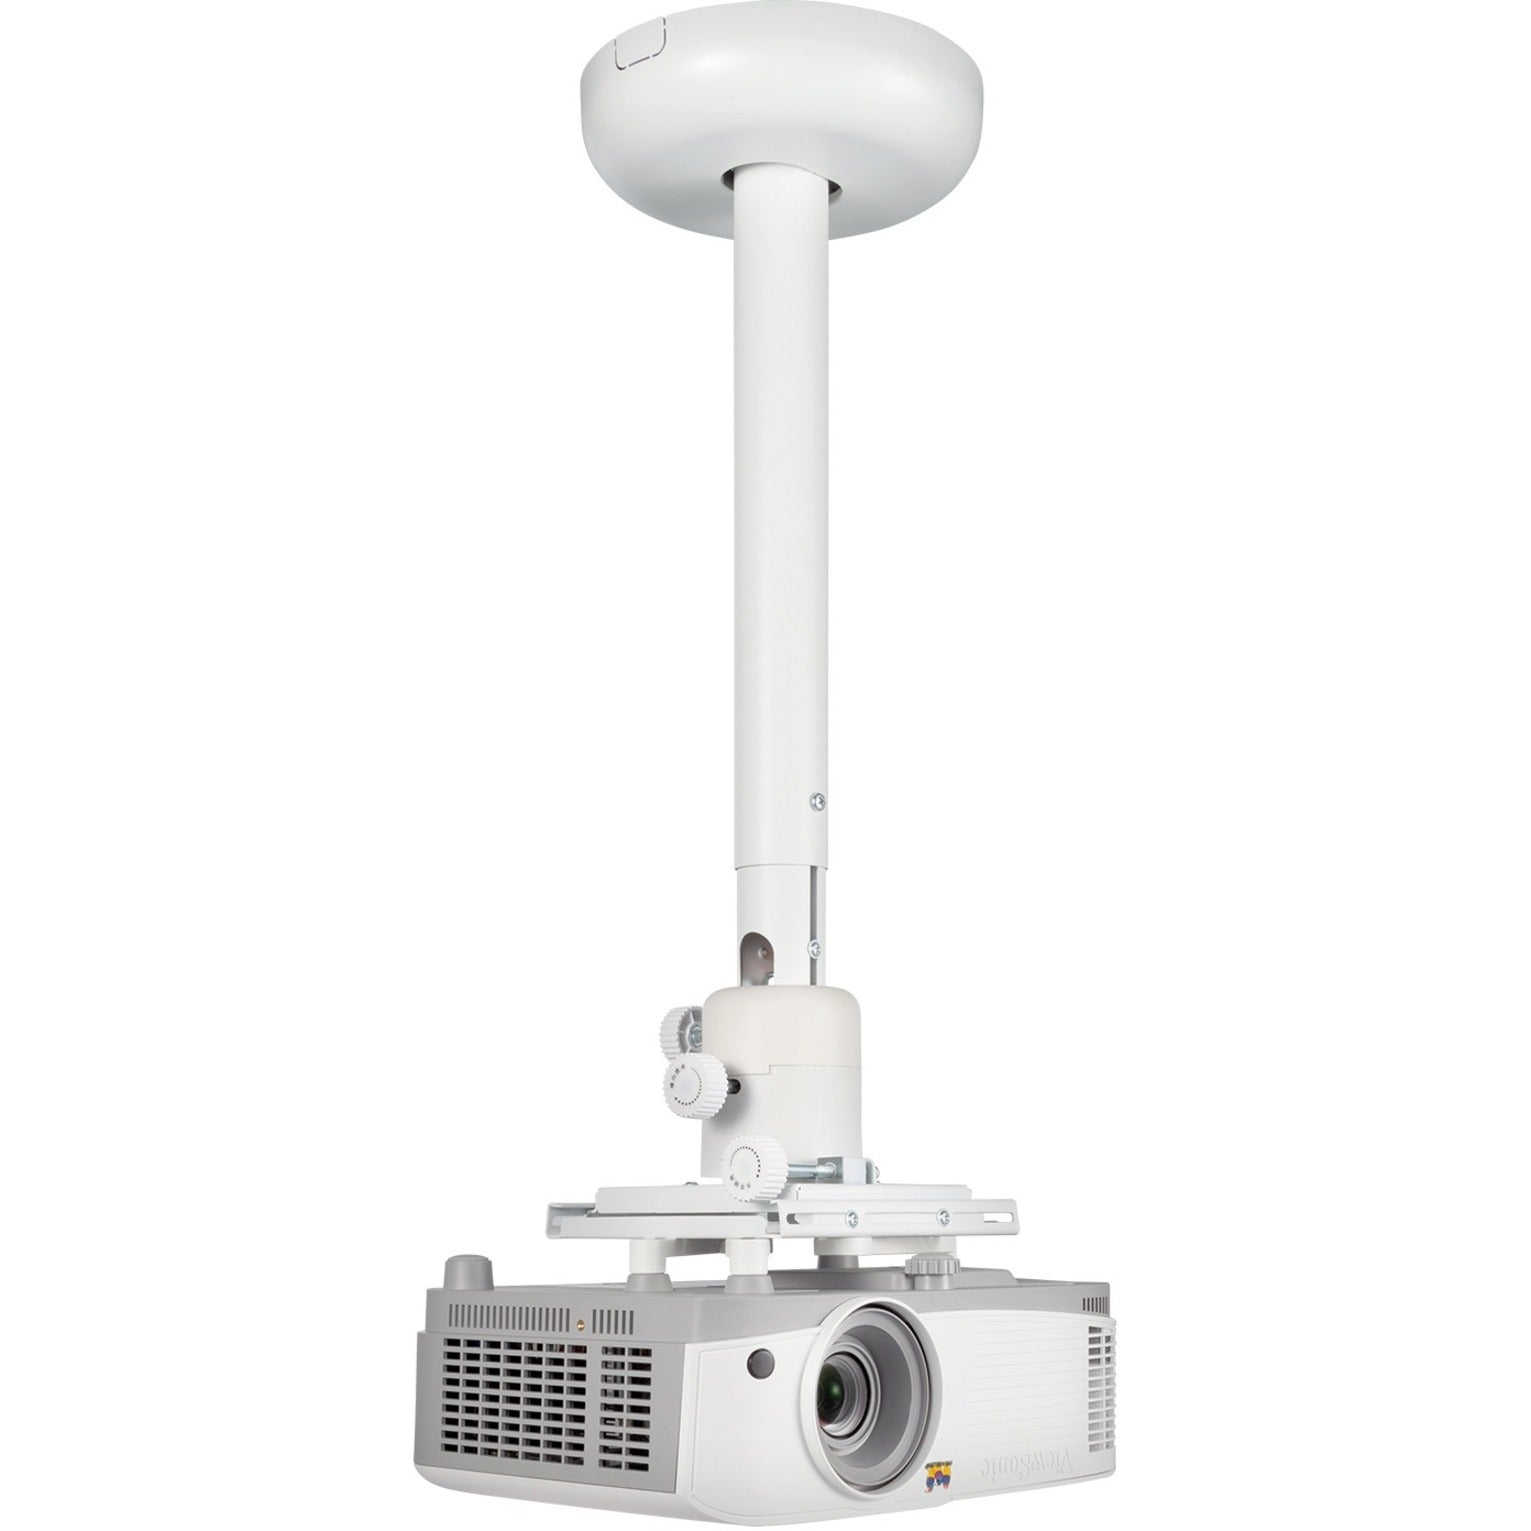 ViewSonic PJ-WMK-007 Ceiling Mount for Projector, White - Easy Installation and Secure Mounting